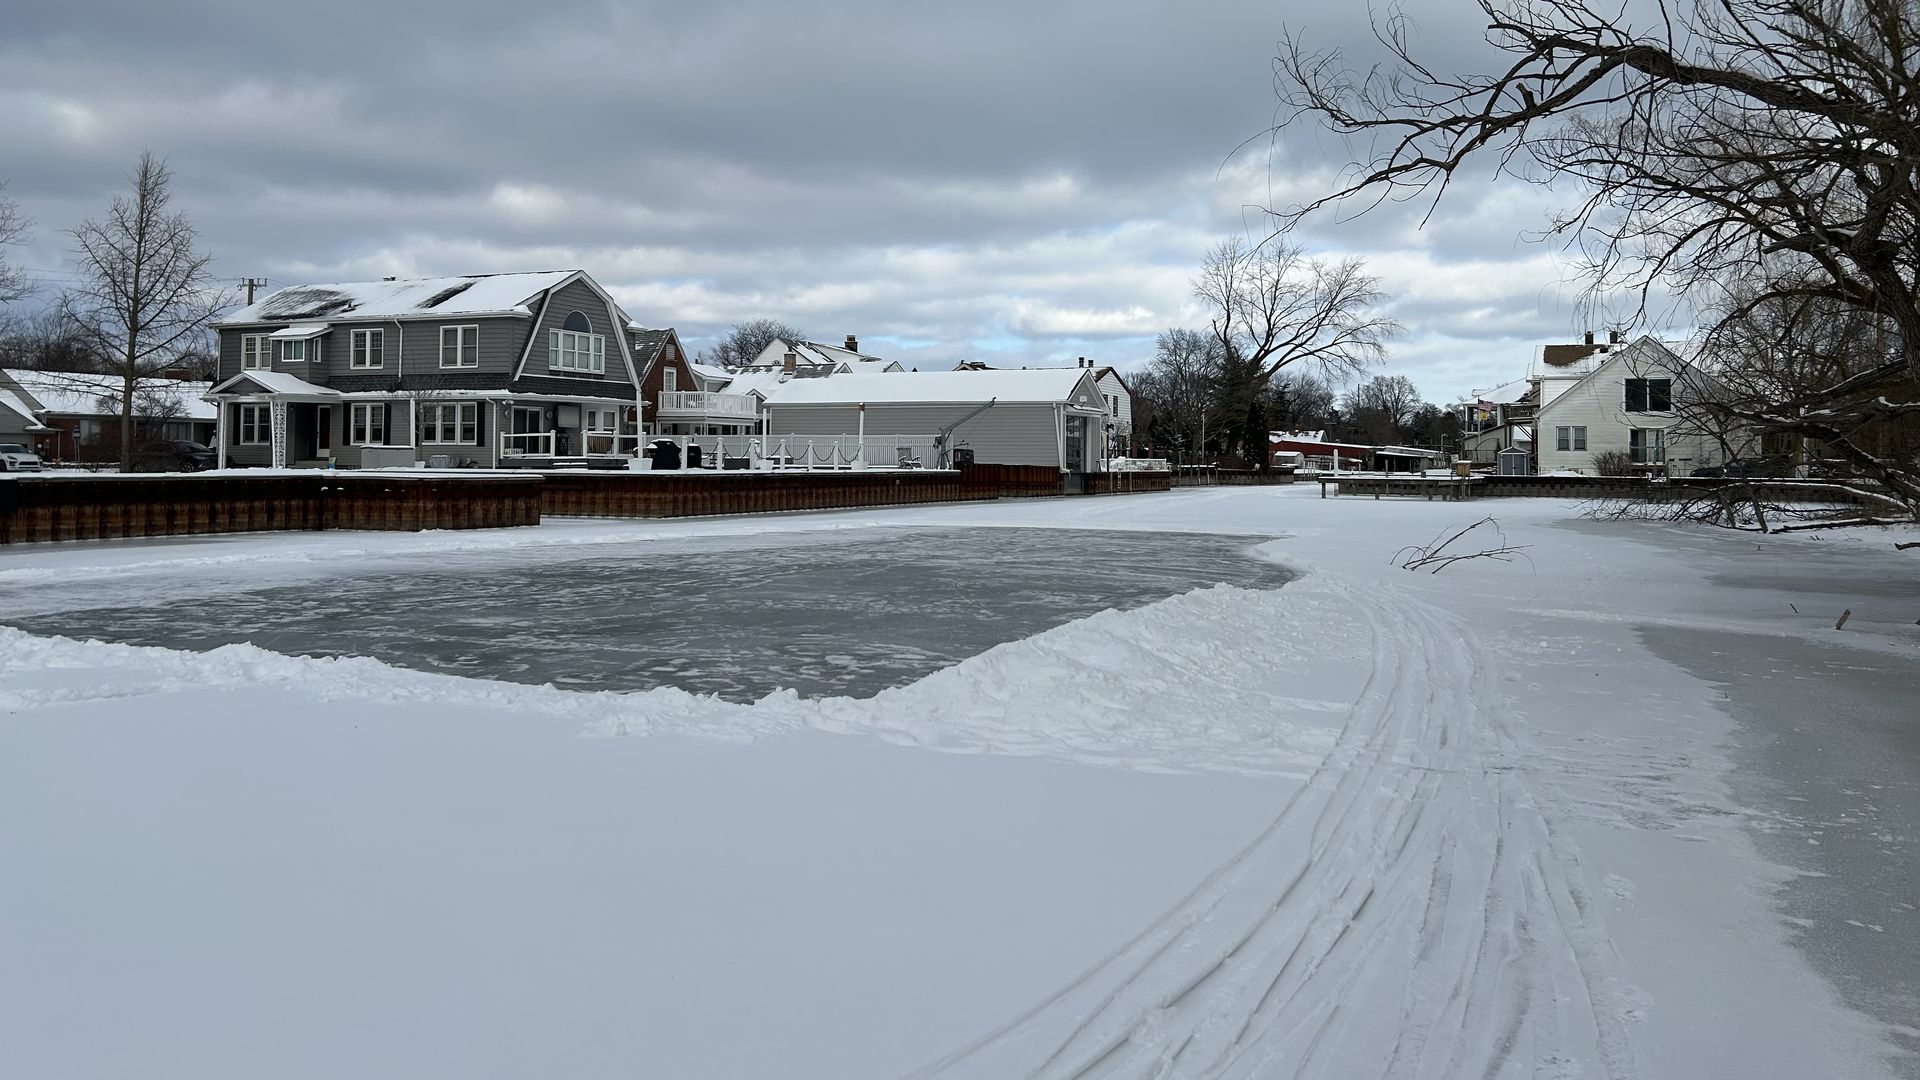 An ice rink has been made in the center of the snow that covers the canal. On either side of the canal, houses and metal seawalls.